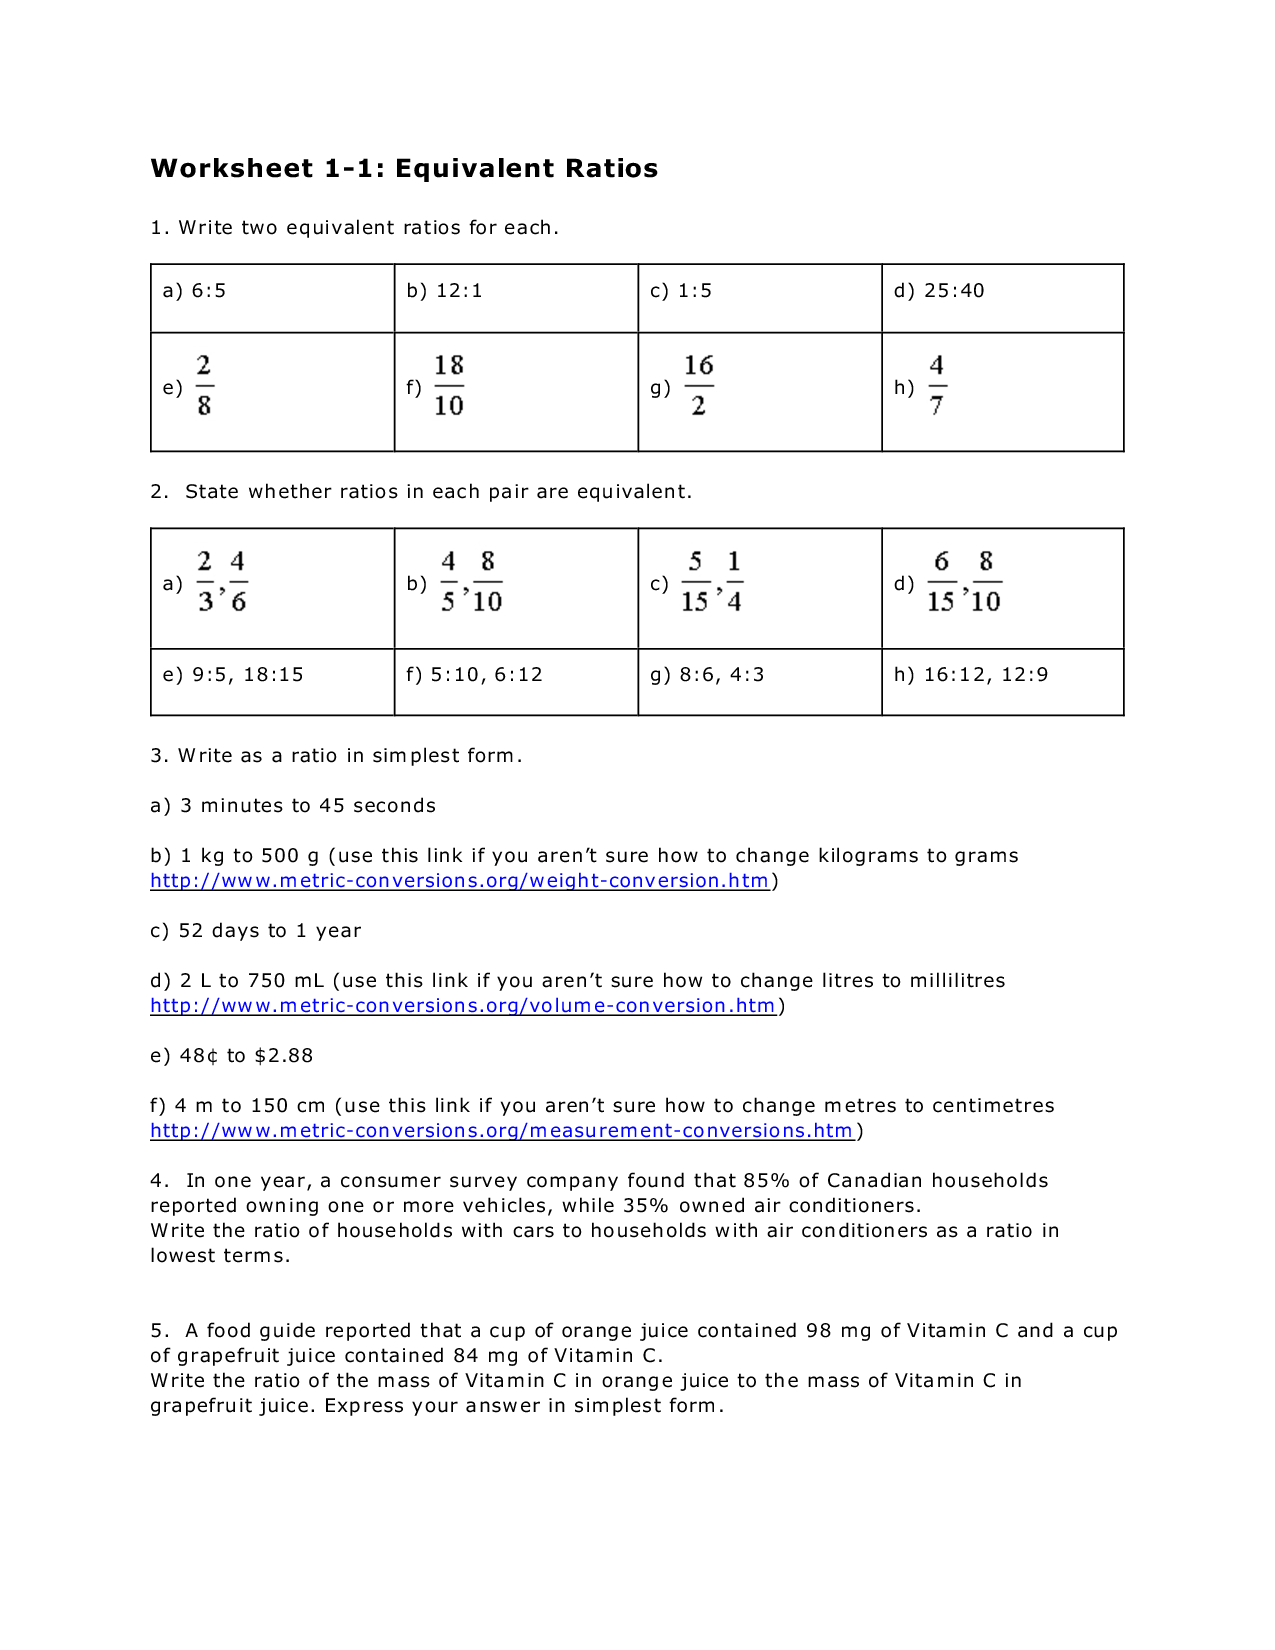 8-best-images-of-equivalent-ratio-word-problem-worksheet-7th-grade-equivalent-ratios-worksheet